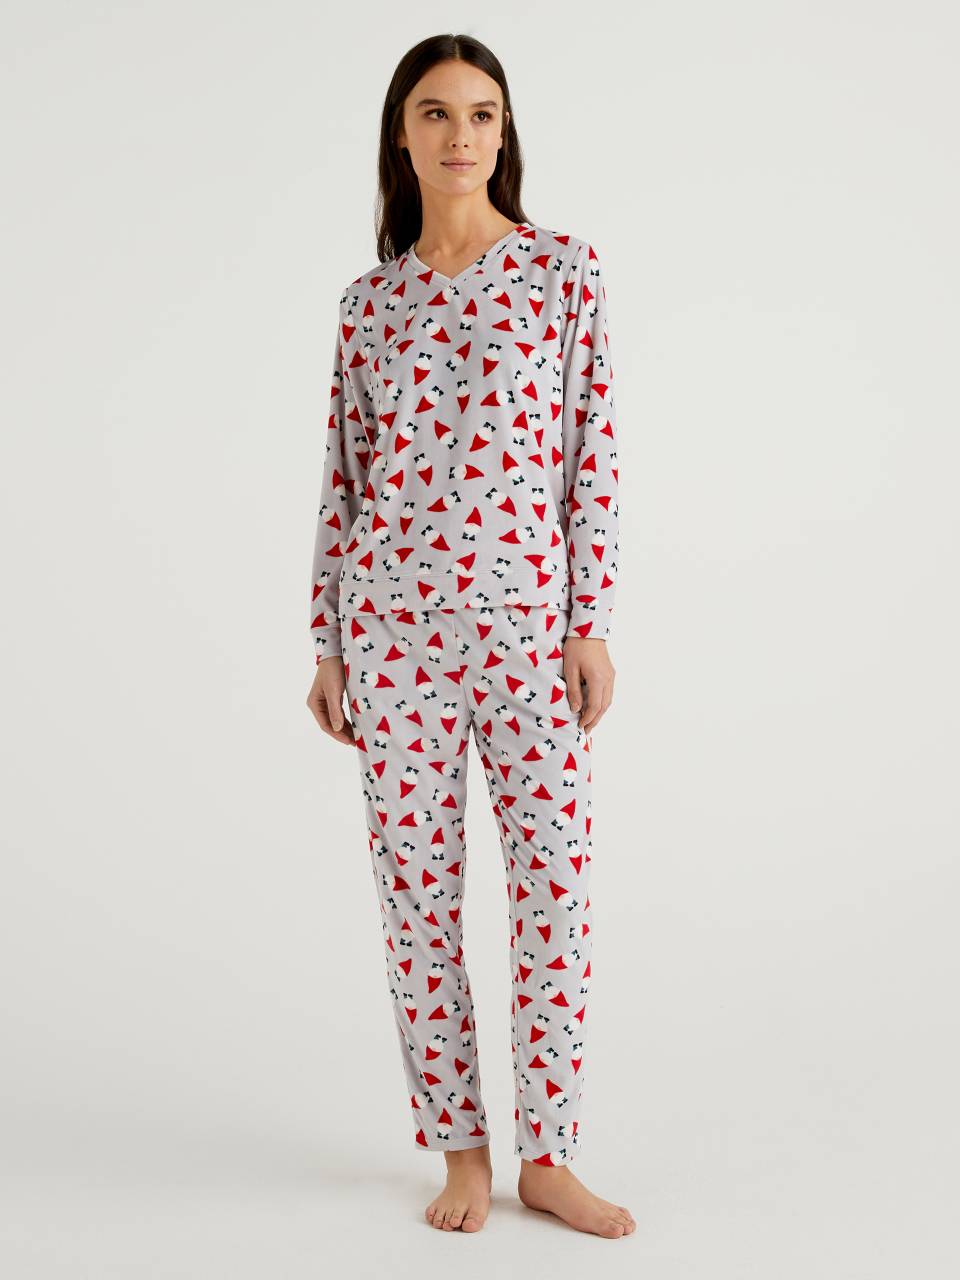 Benetton Pyjamas in chenille with dwarves print. 1